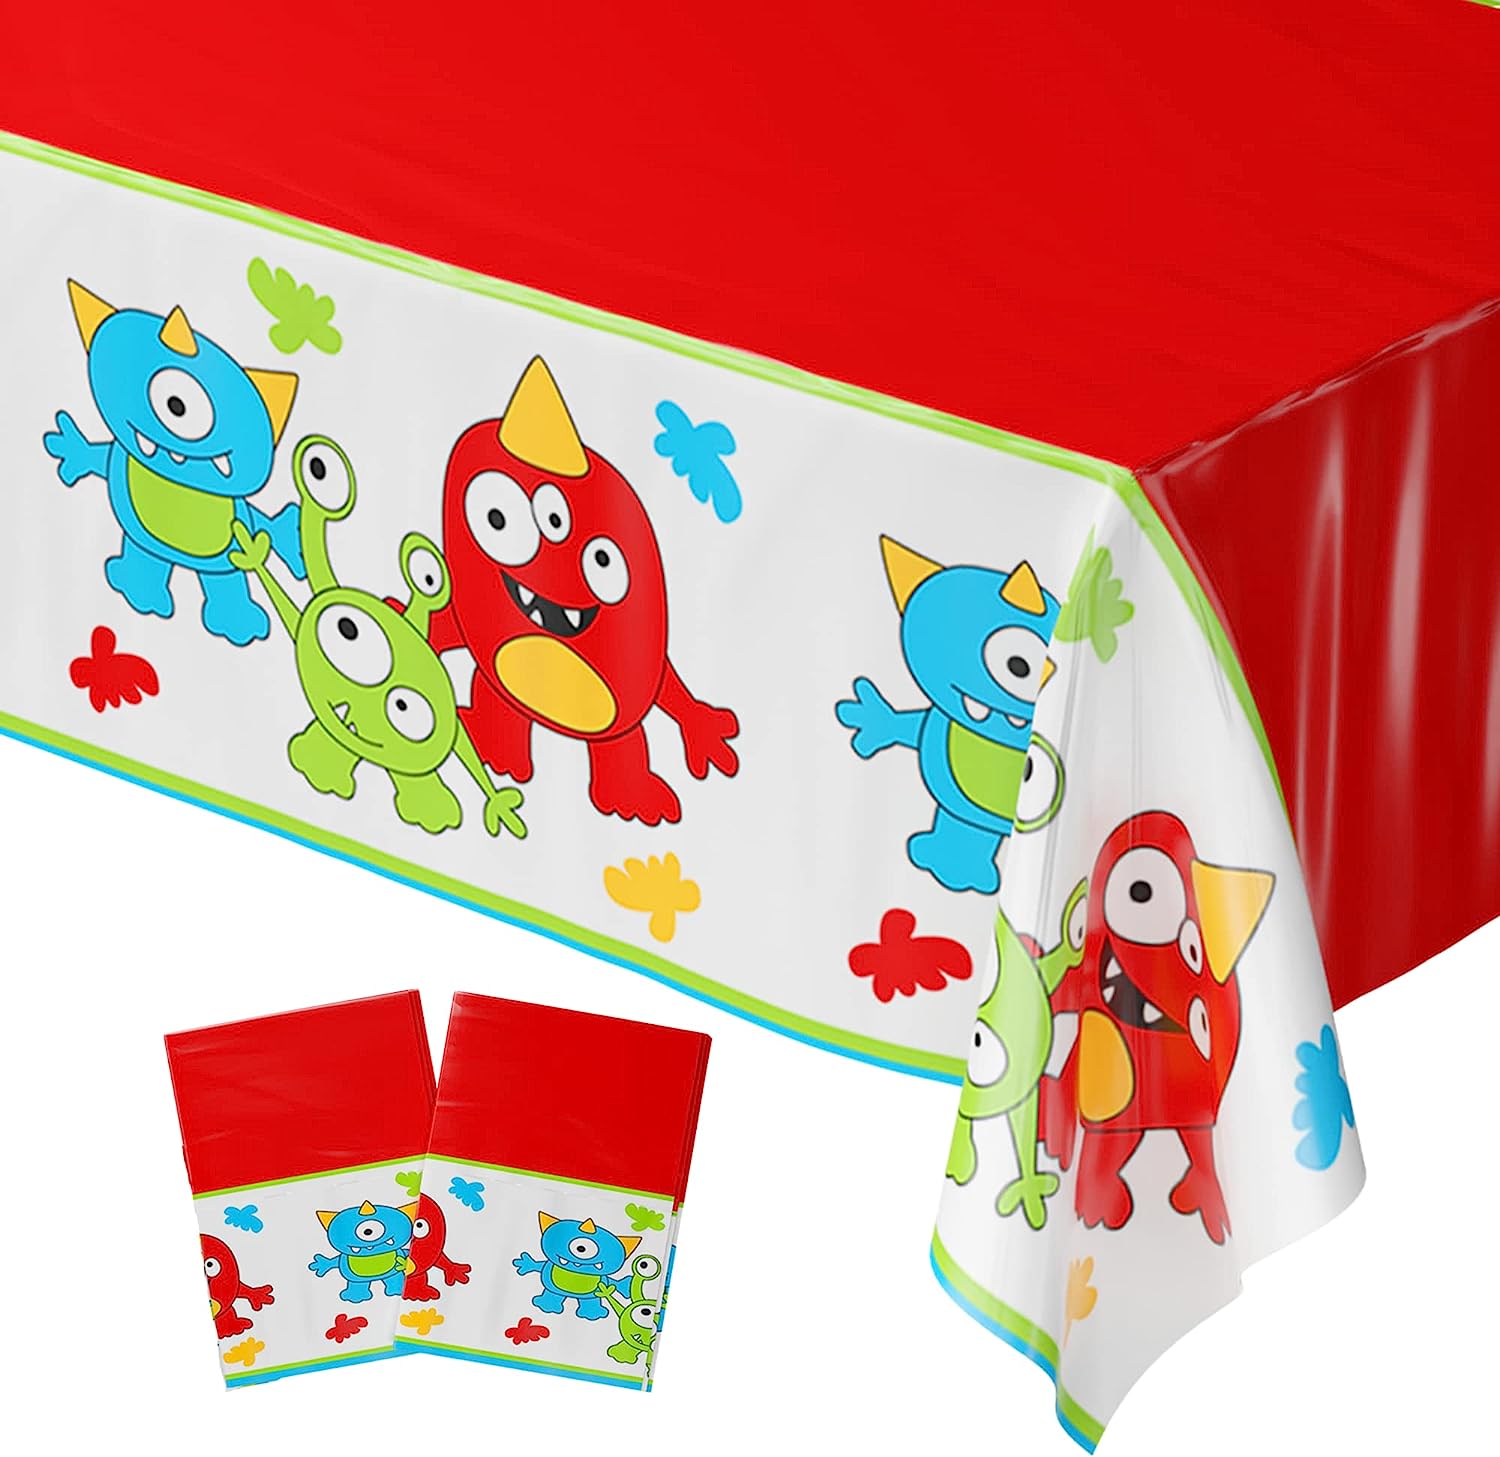 Monster Party Table Covers (Pack of 2) - 54"x108" XL - Monster Party Supplies, Monster Birthday Party, Monster Themed 1st Birthday, Kids Monster Birthday, Monster Party Decorations